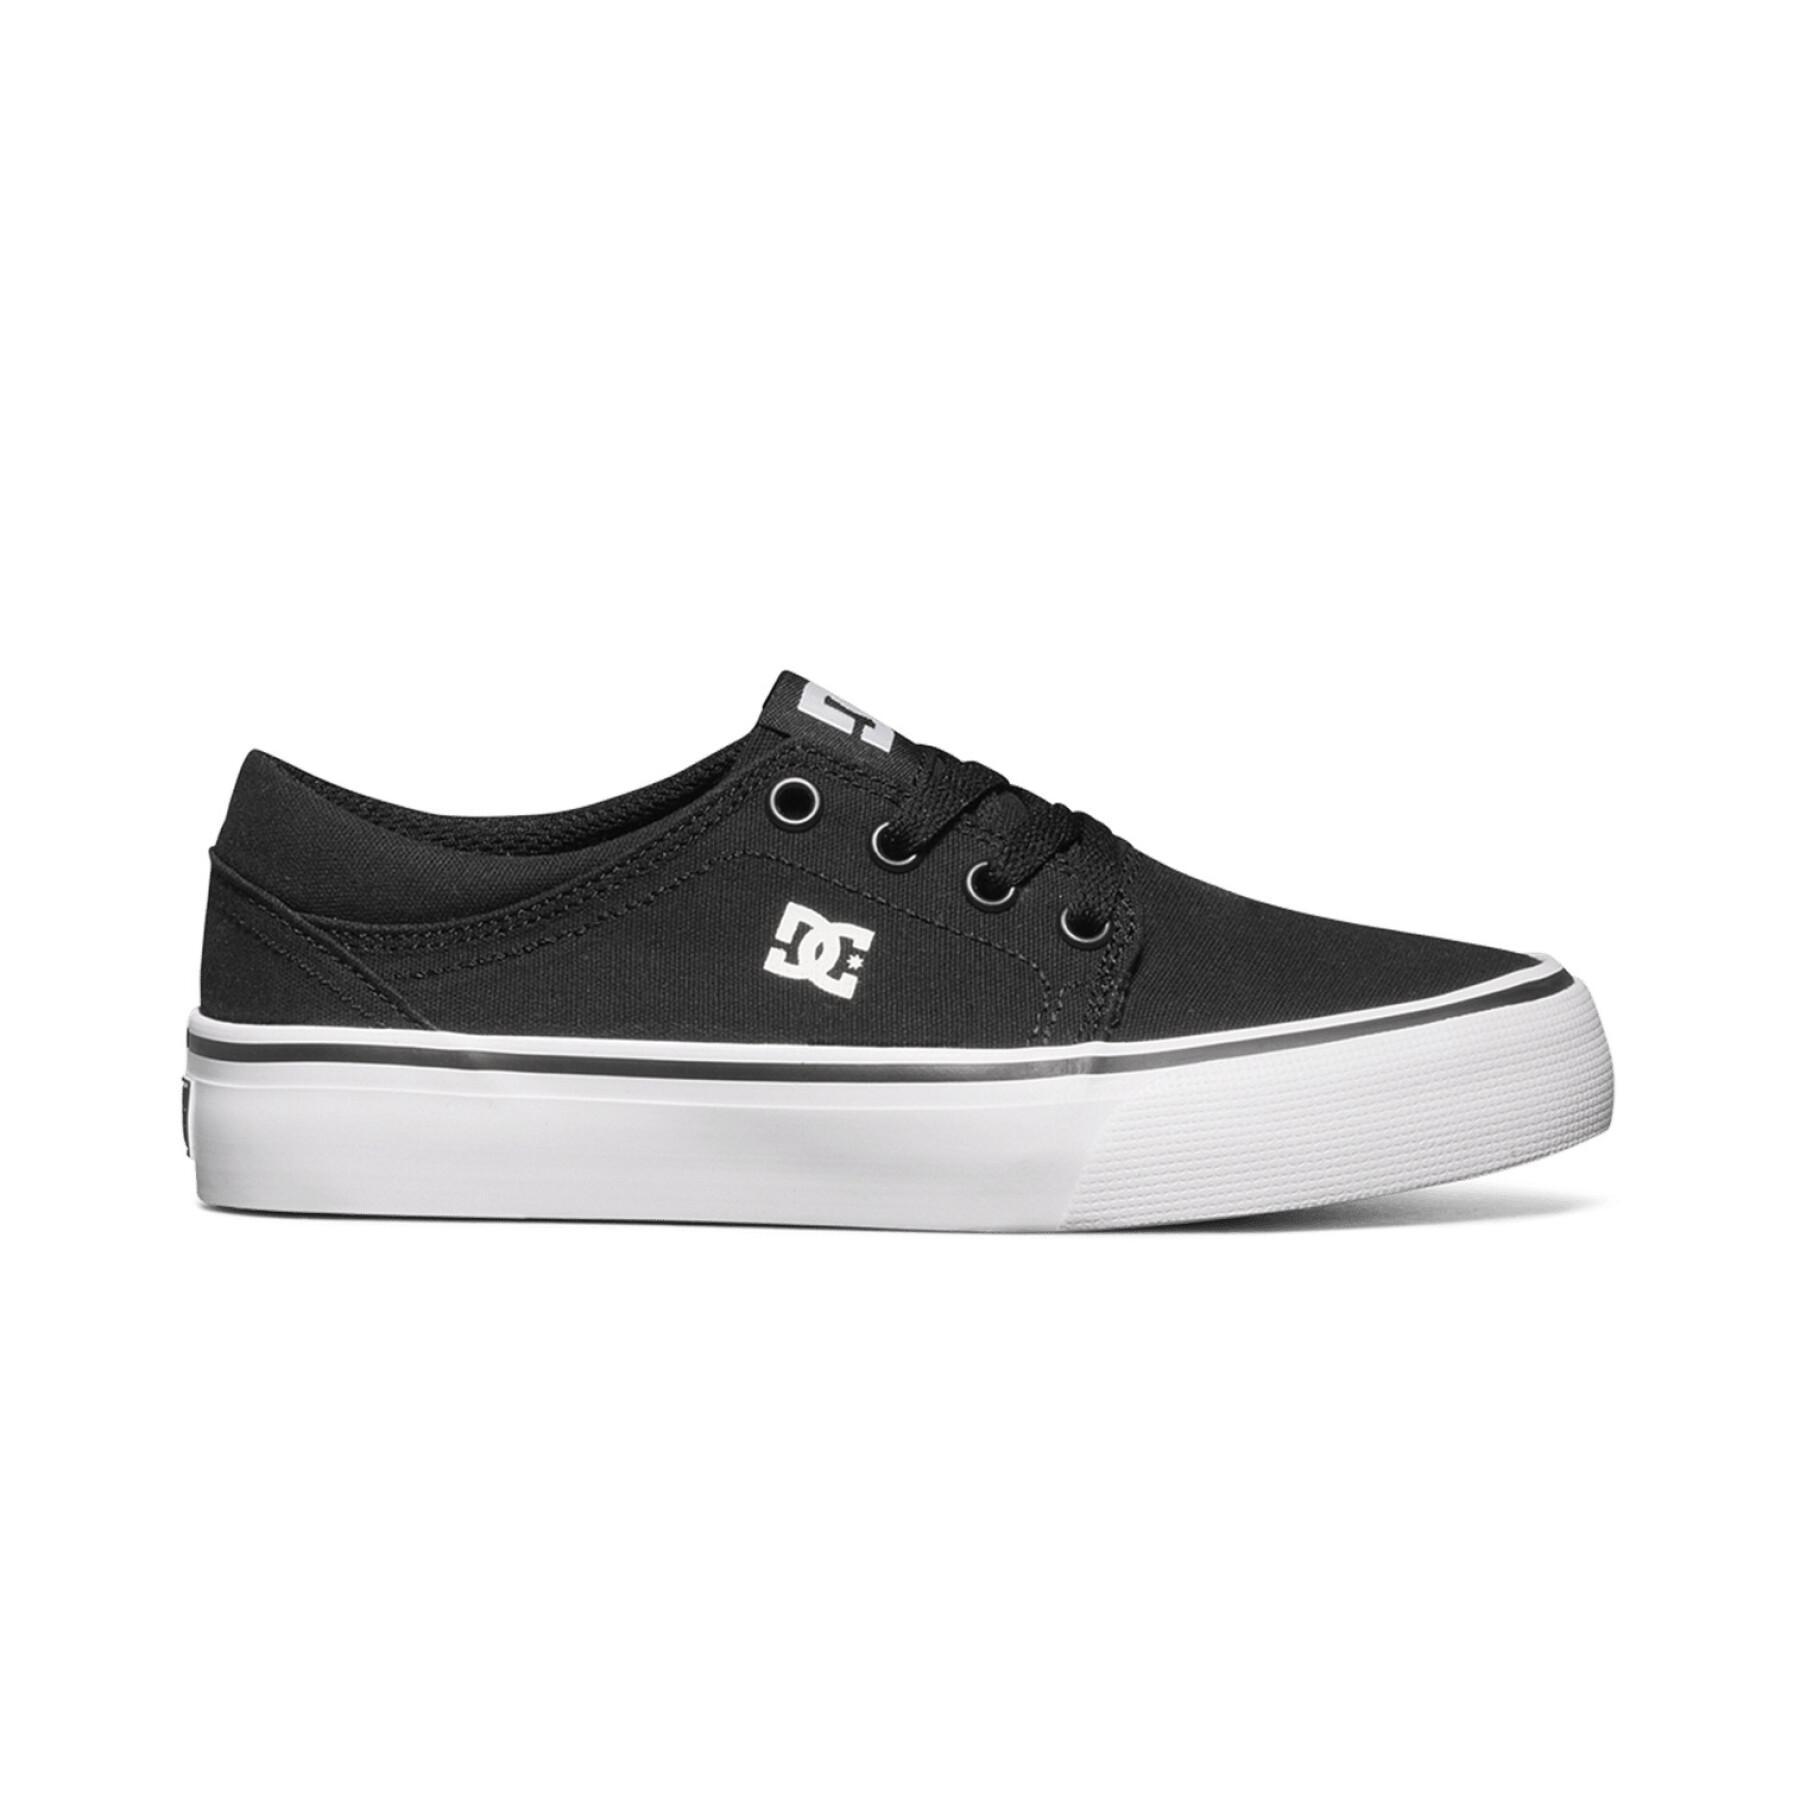 Children's sneakers DC Shoes Trase Tx